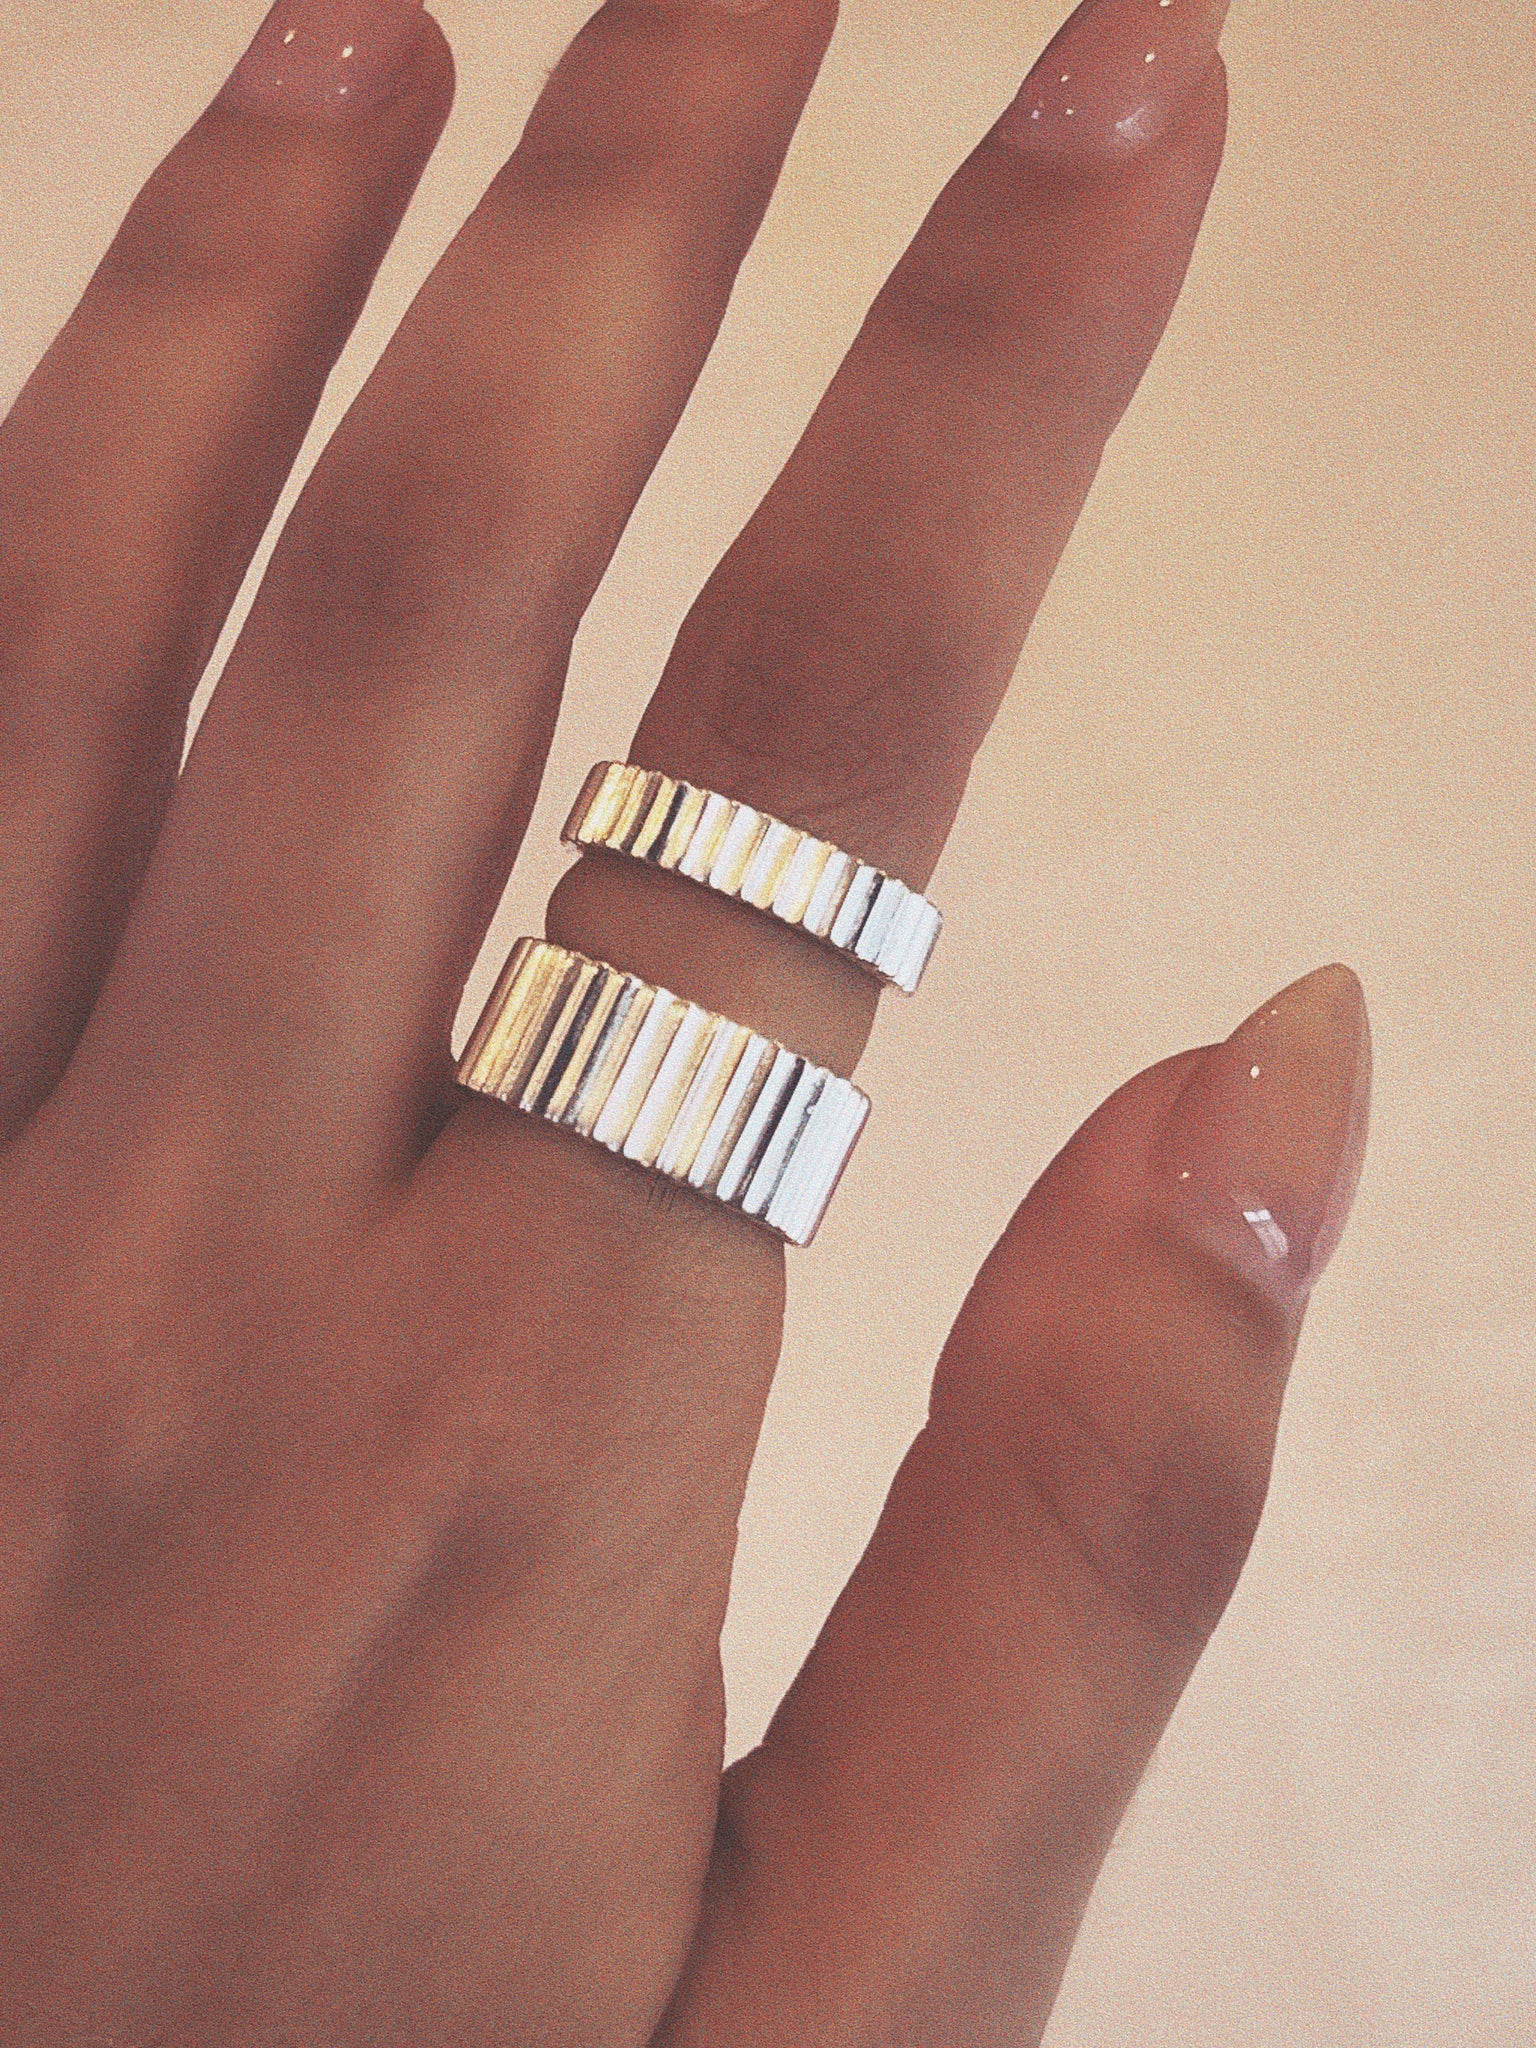 AIA Geometric Sterling Silver Ring